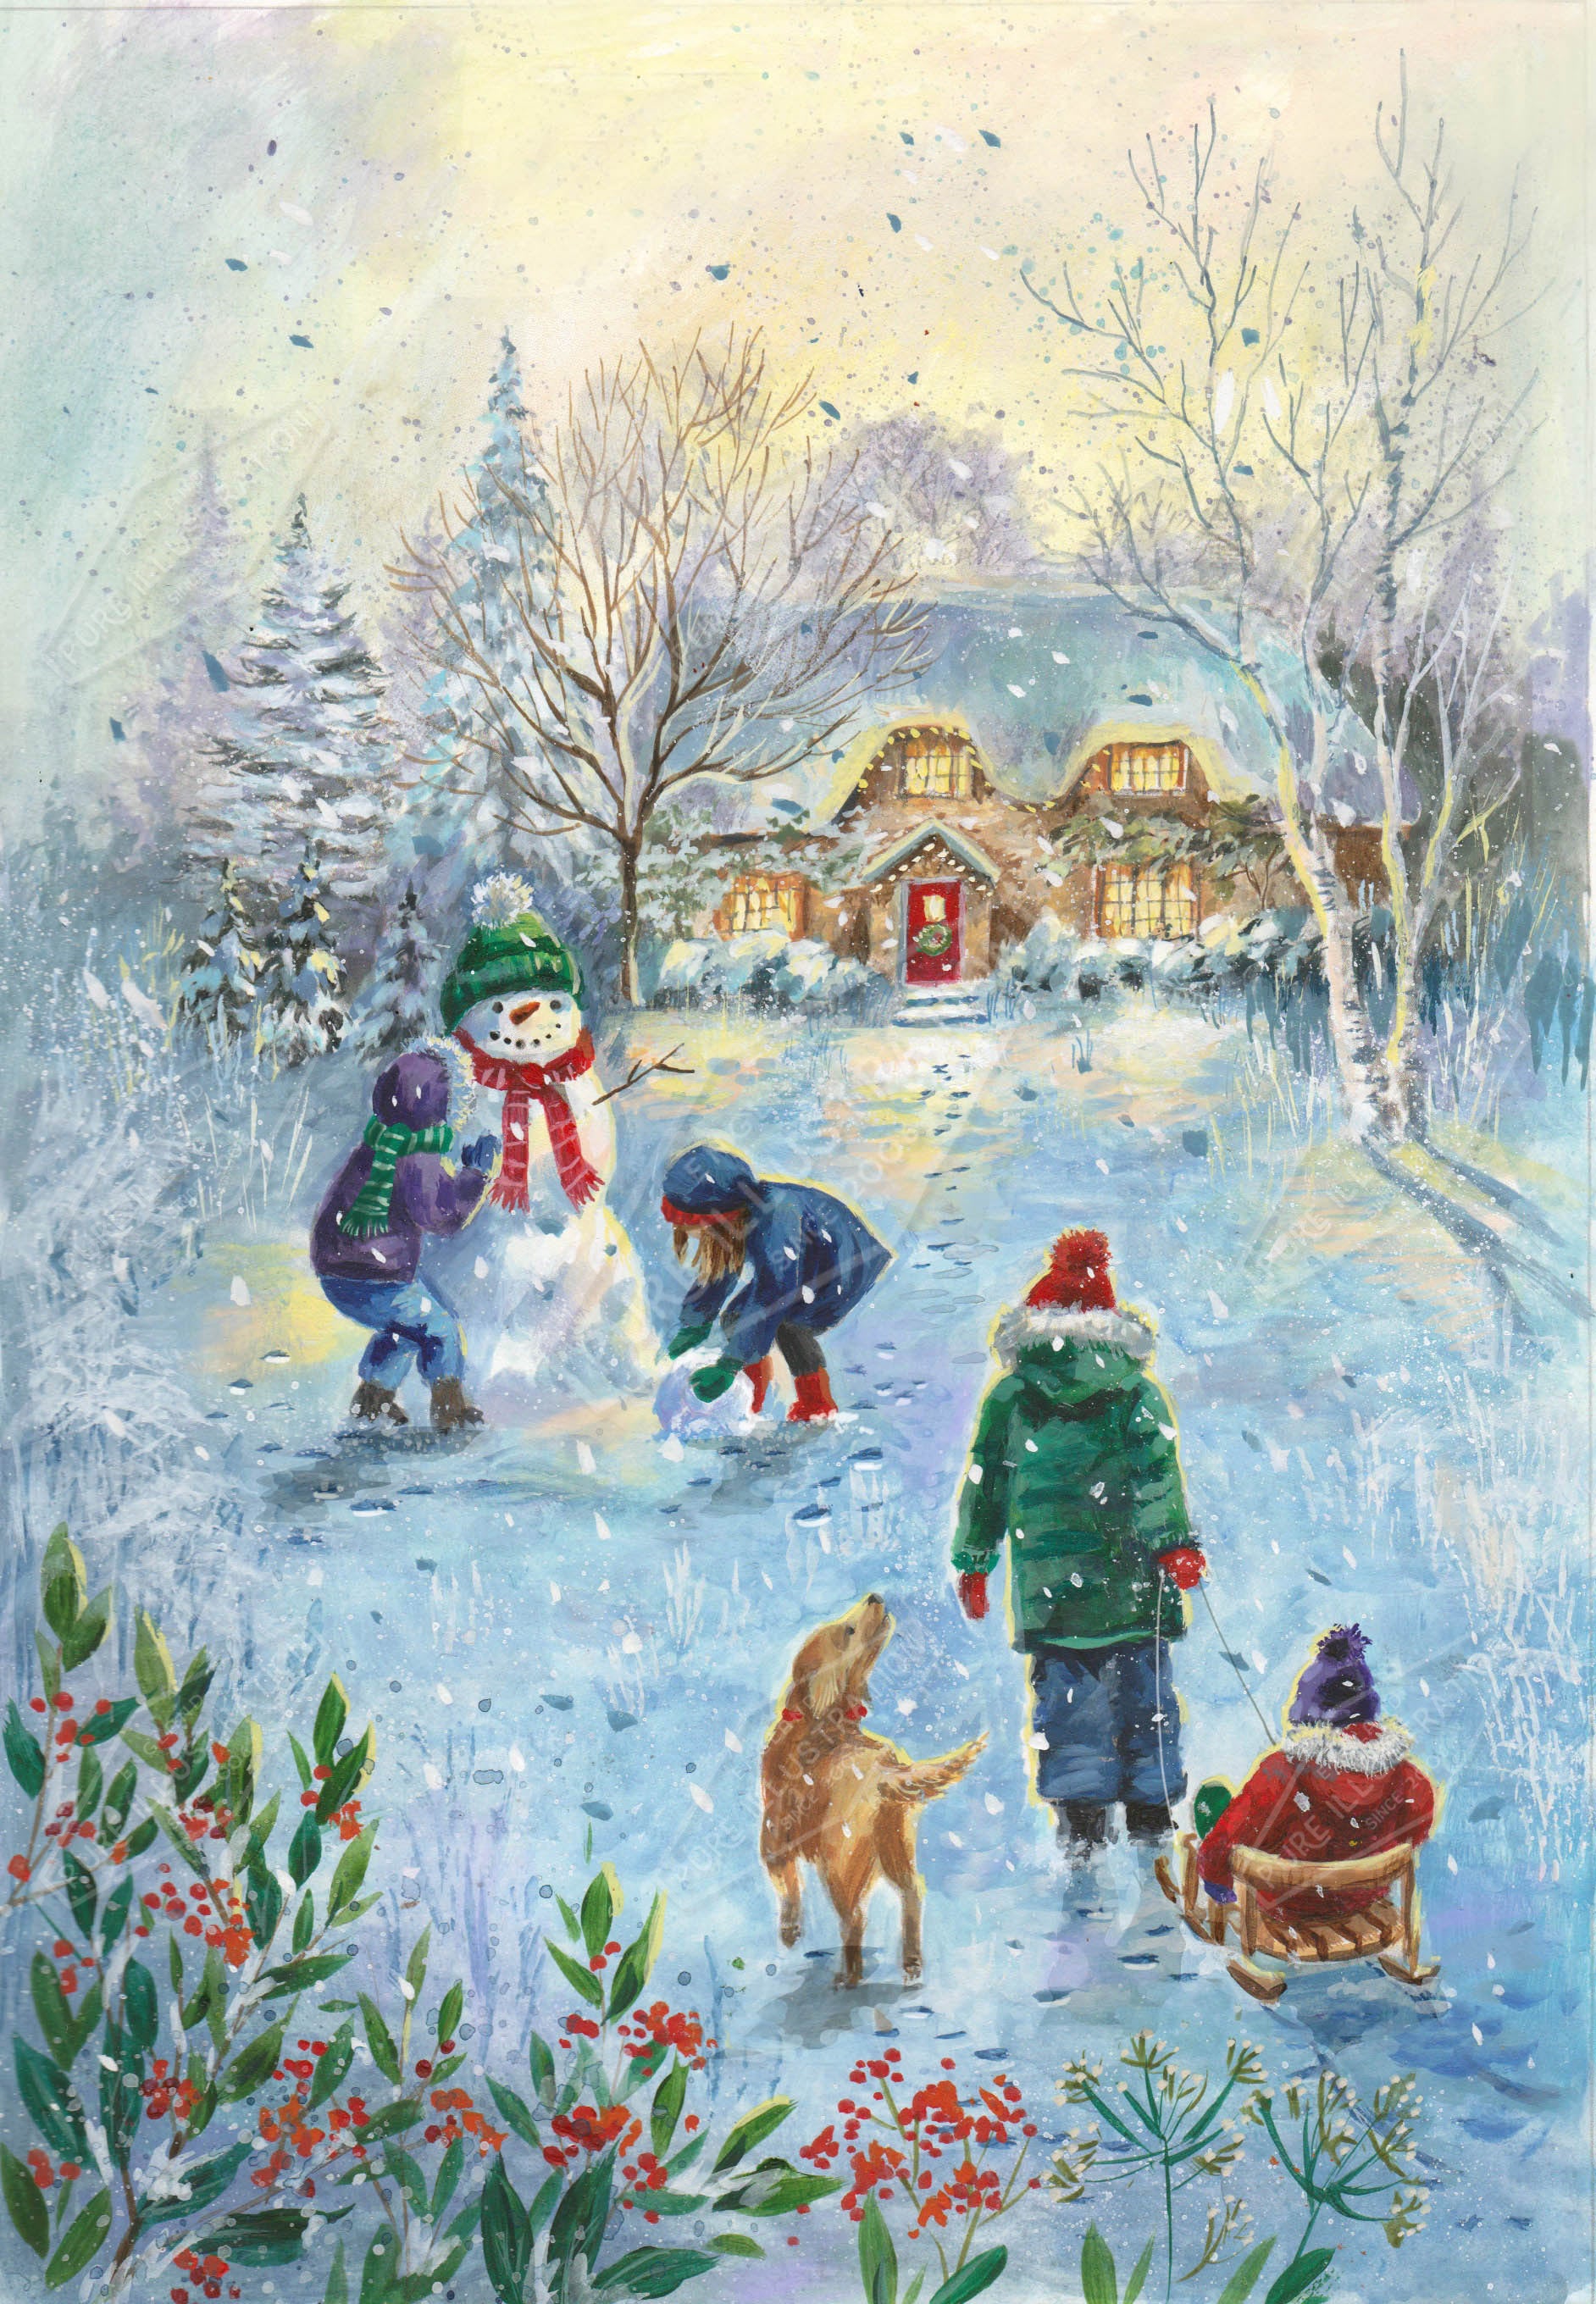 00035707AMA - Ally Marie is represented by Pure Art Licensing Agency - Christmas Greeting Card Design